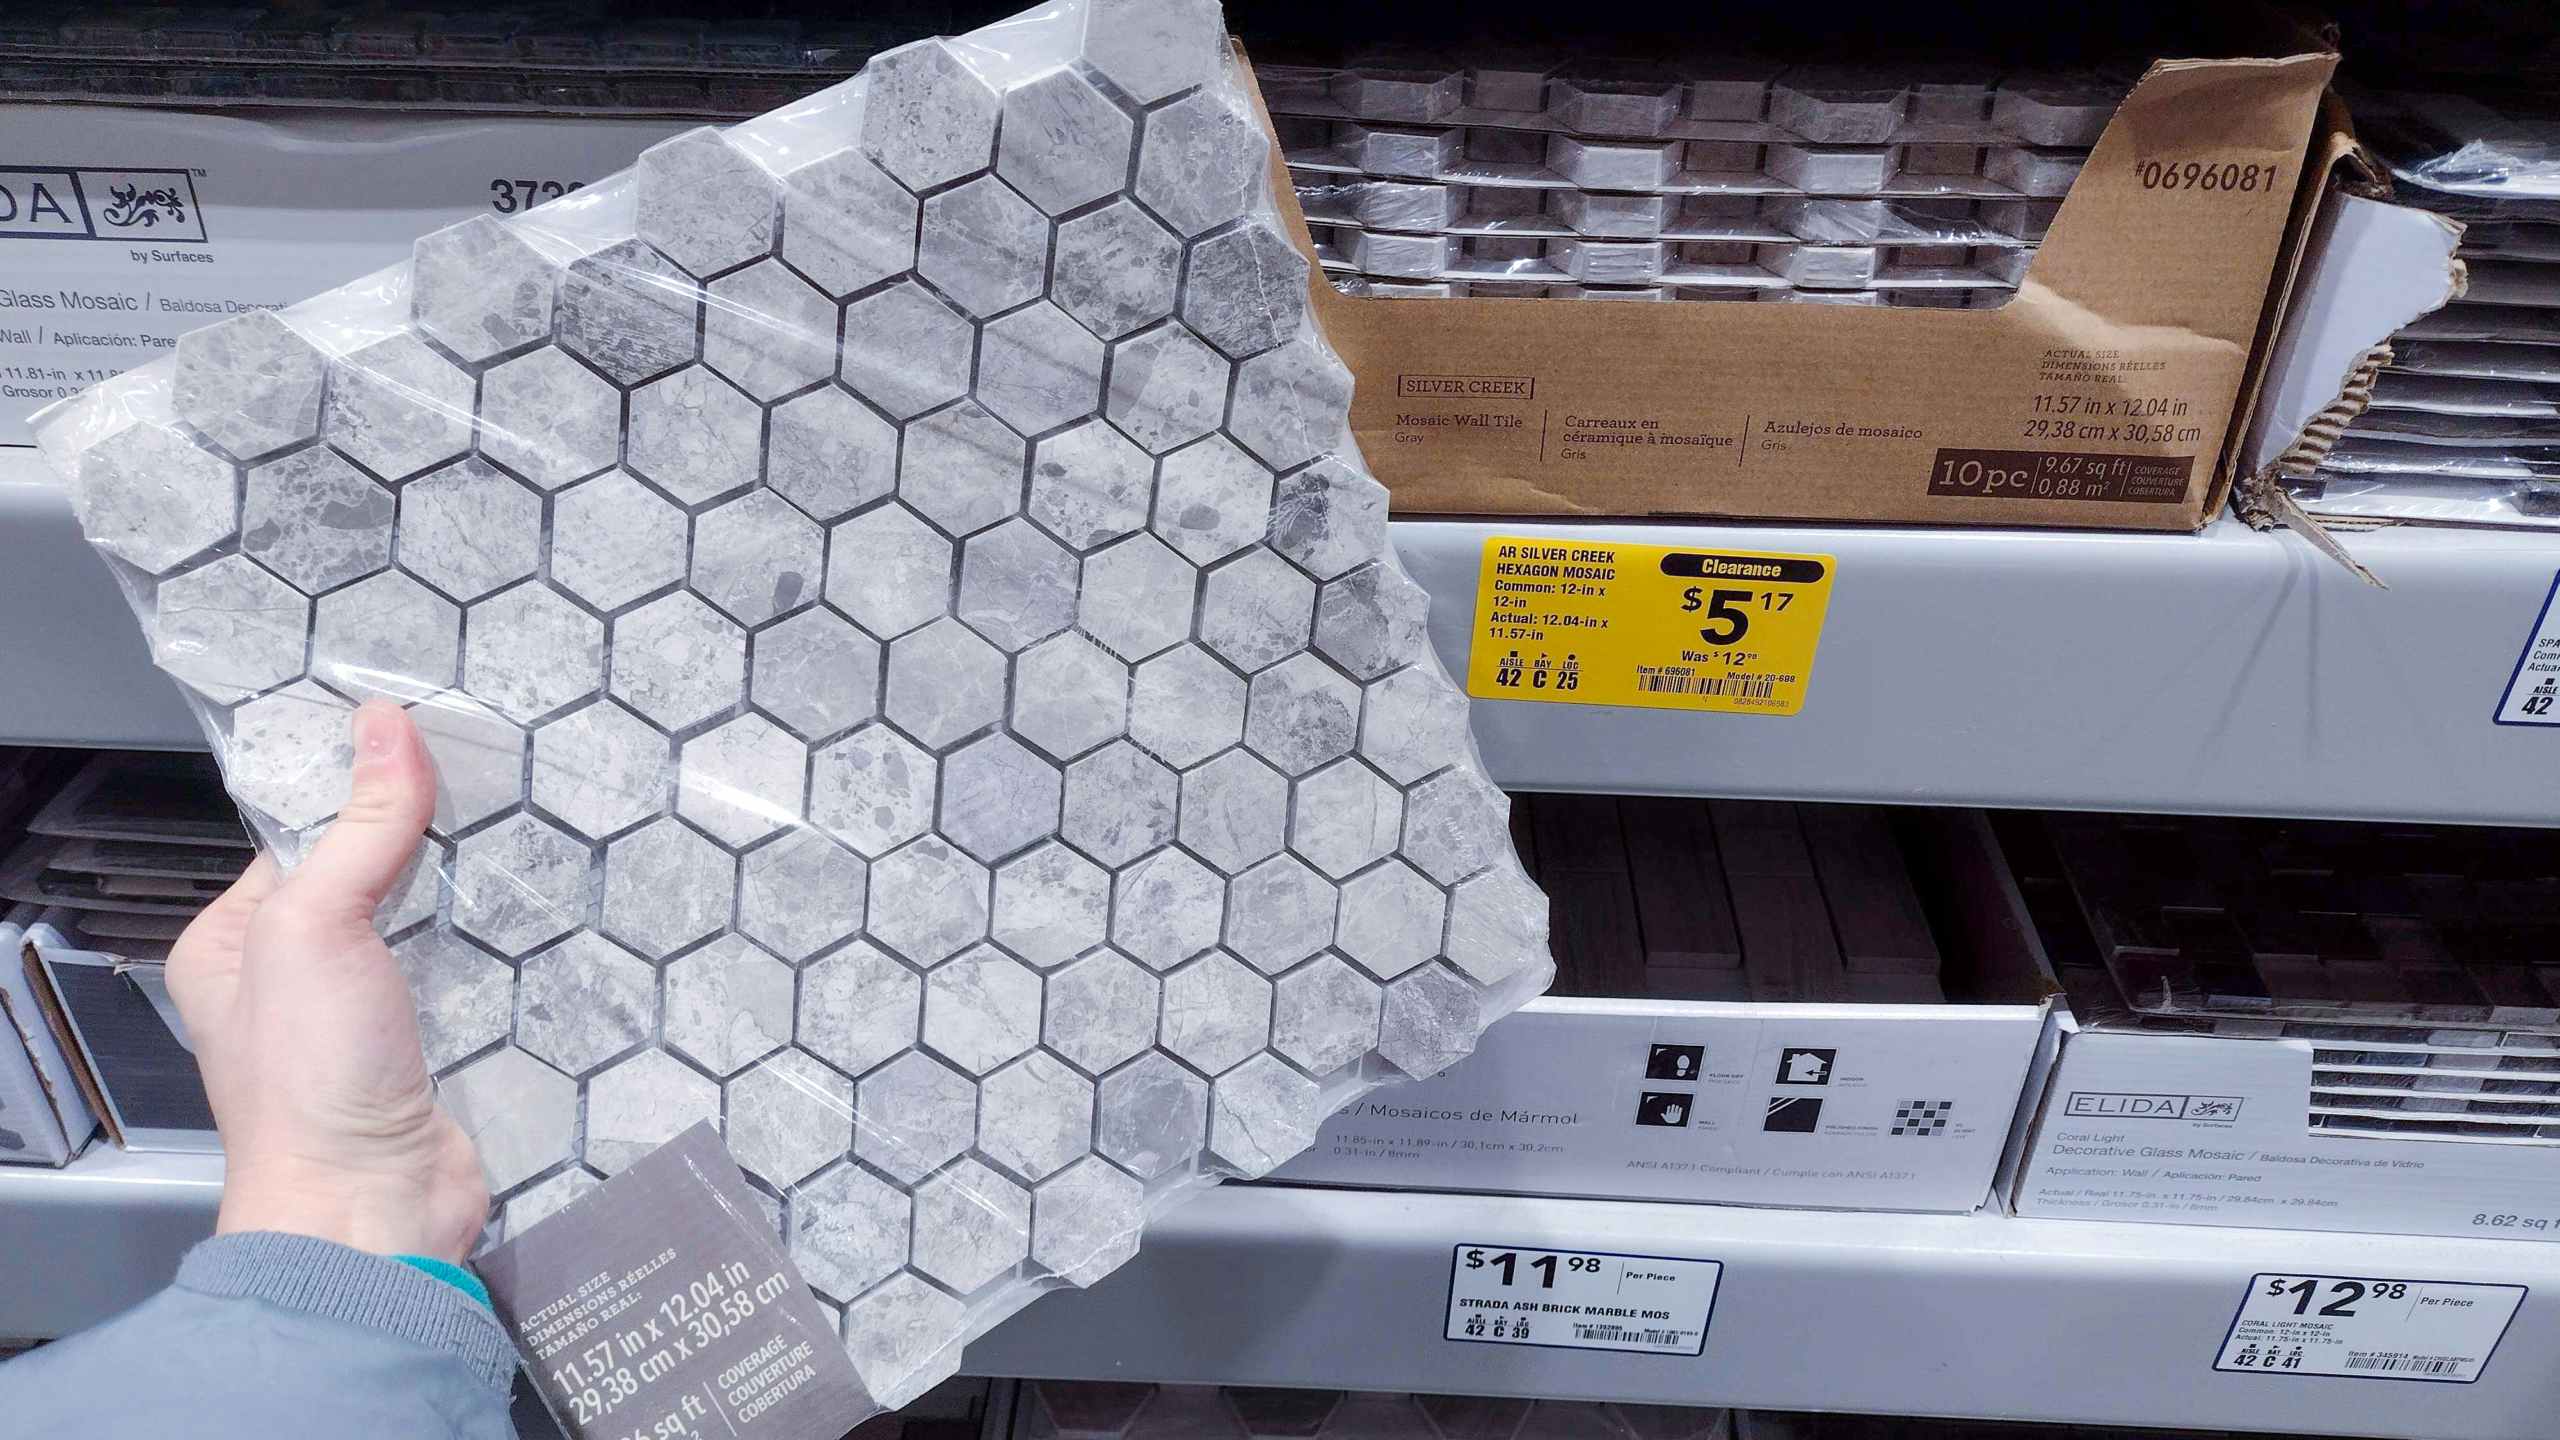 lowes year end clearance hexagon mosaic tiles hand holding